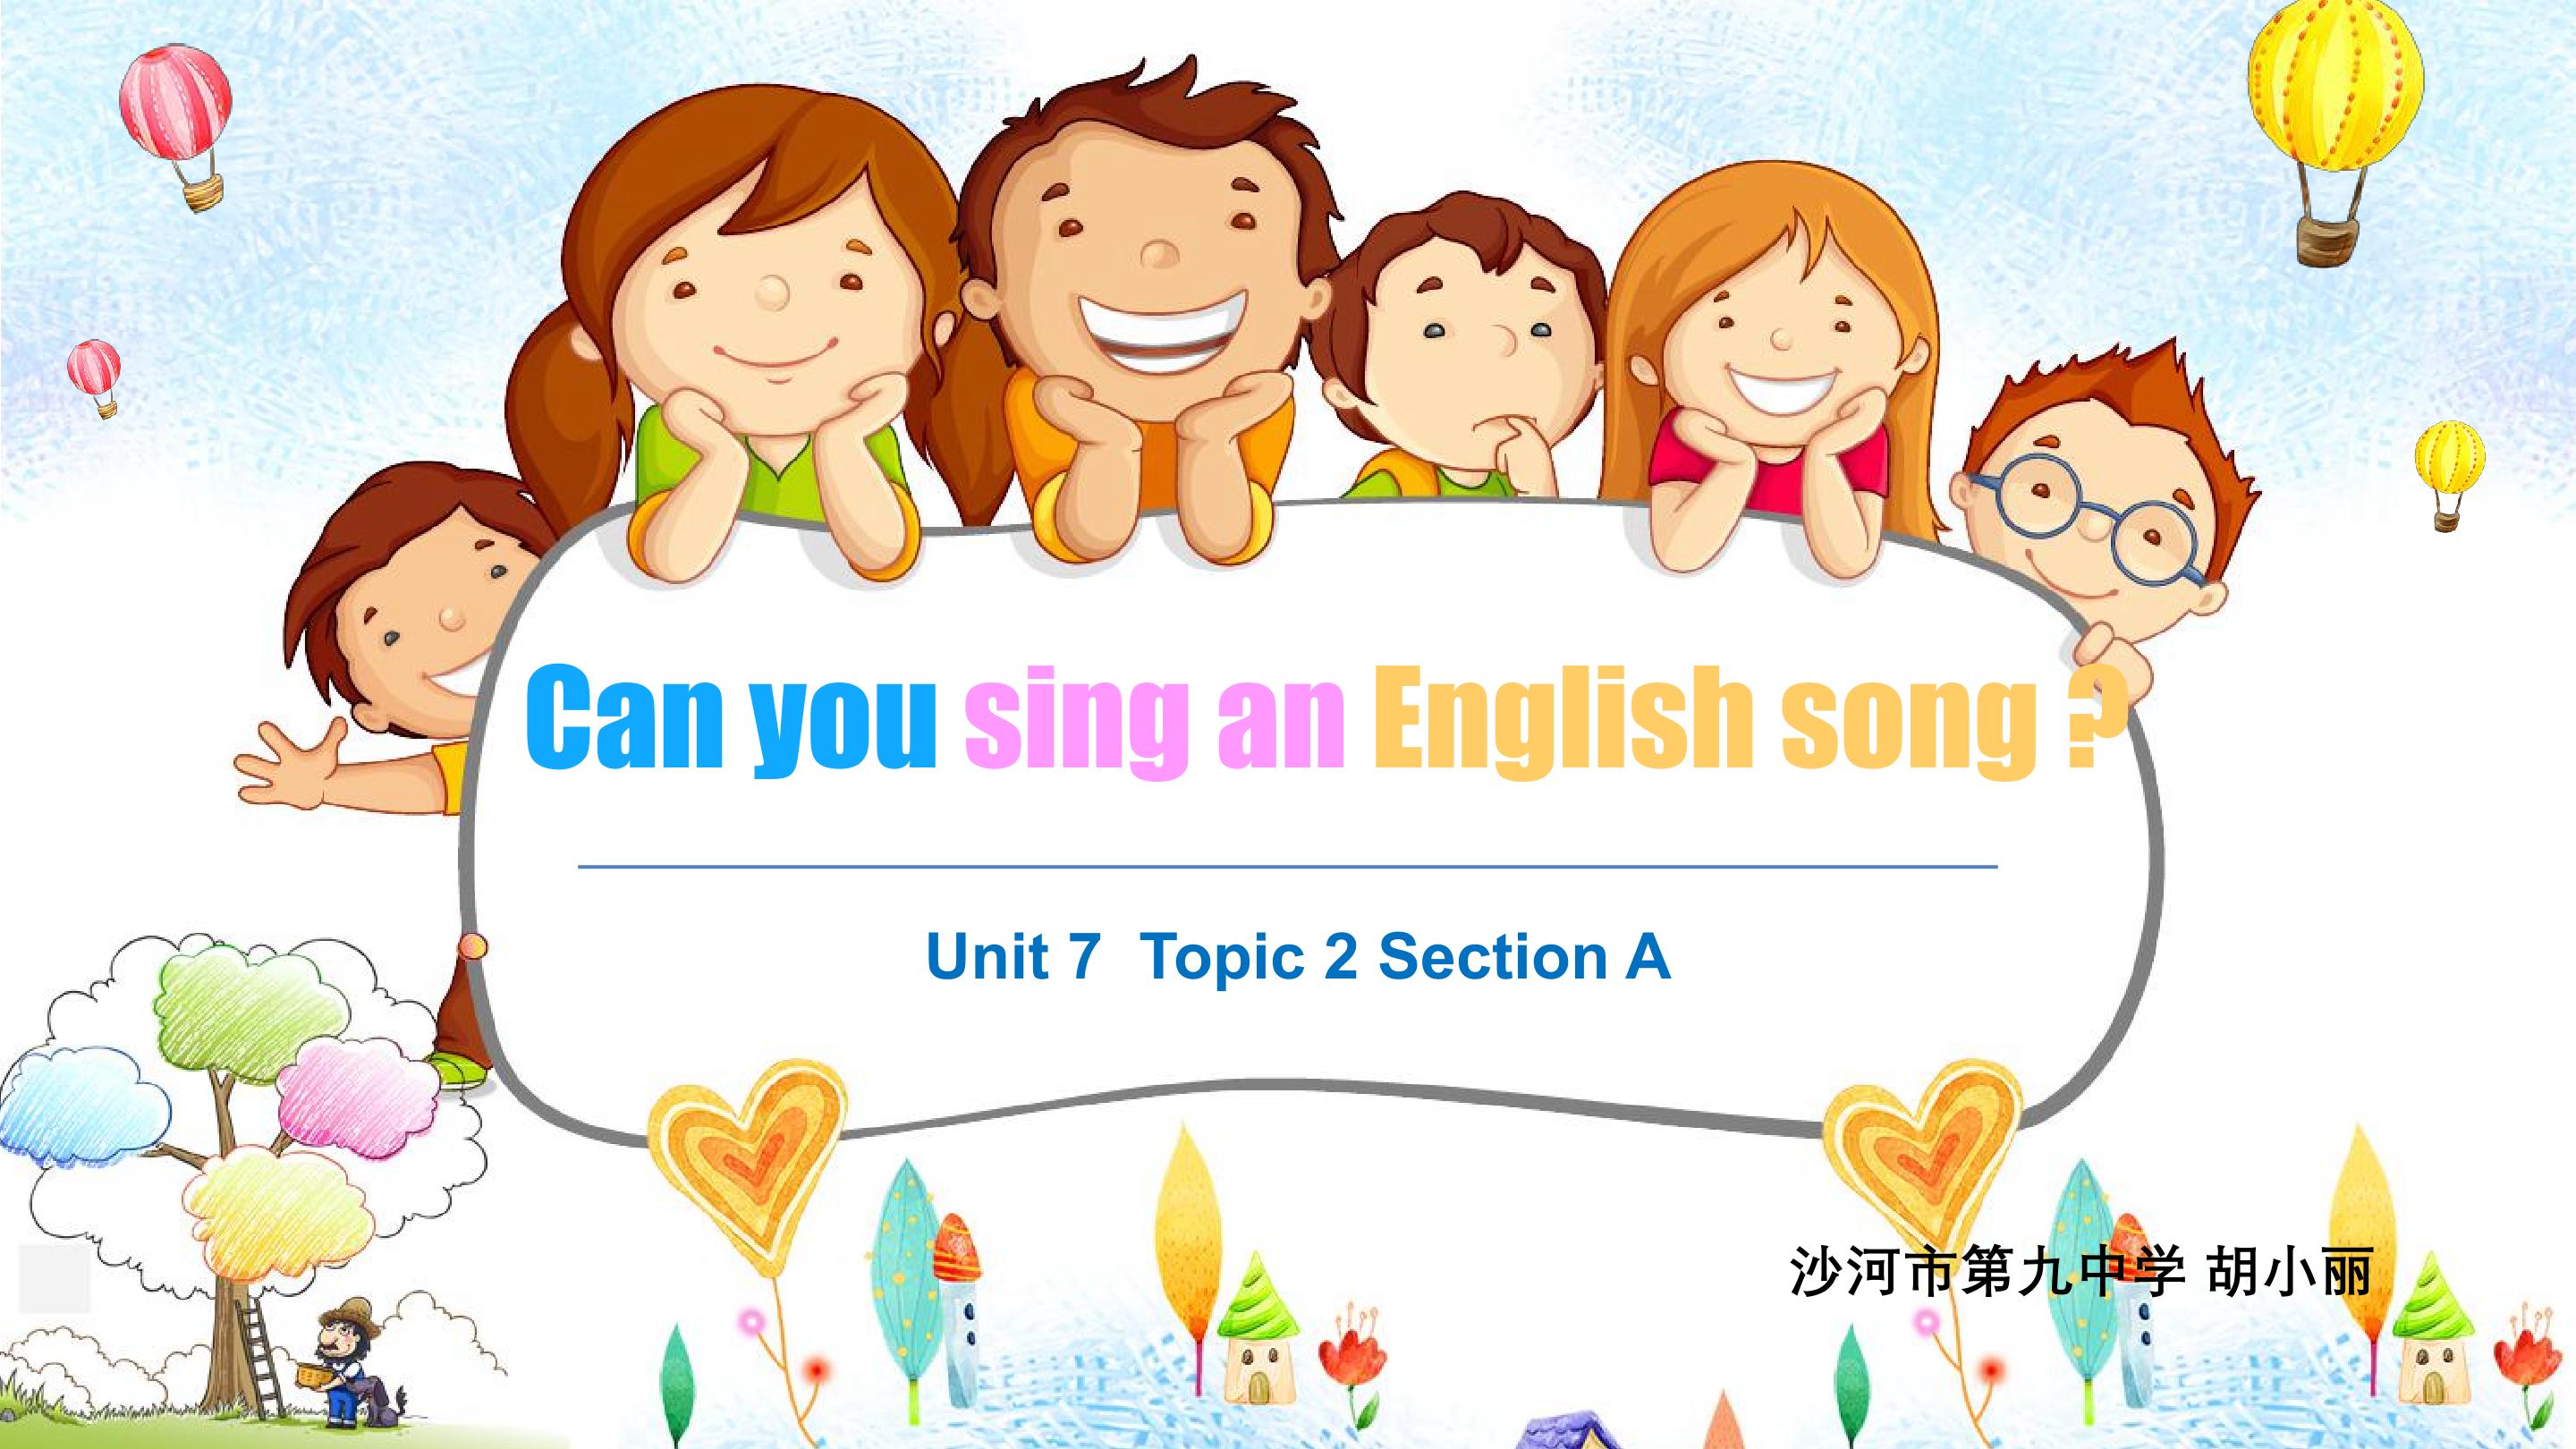 Can you sing an English song？